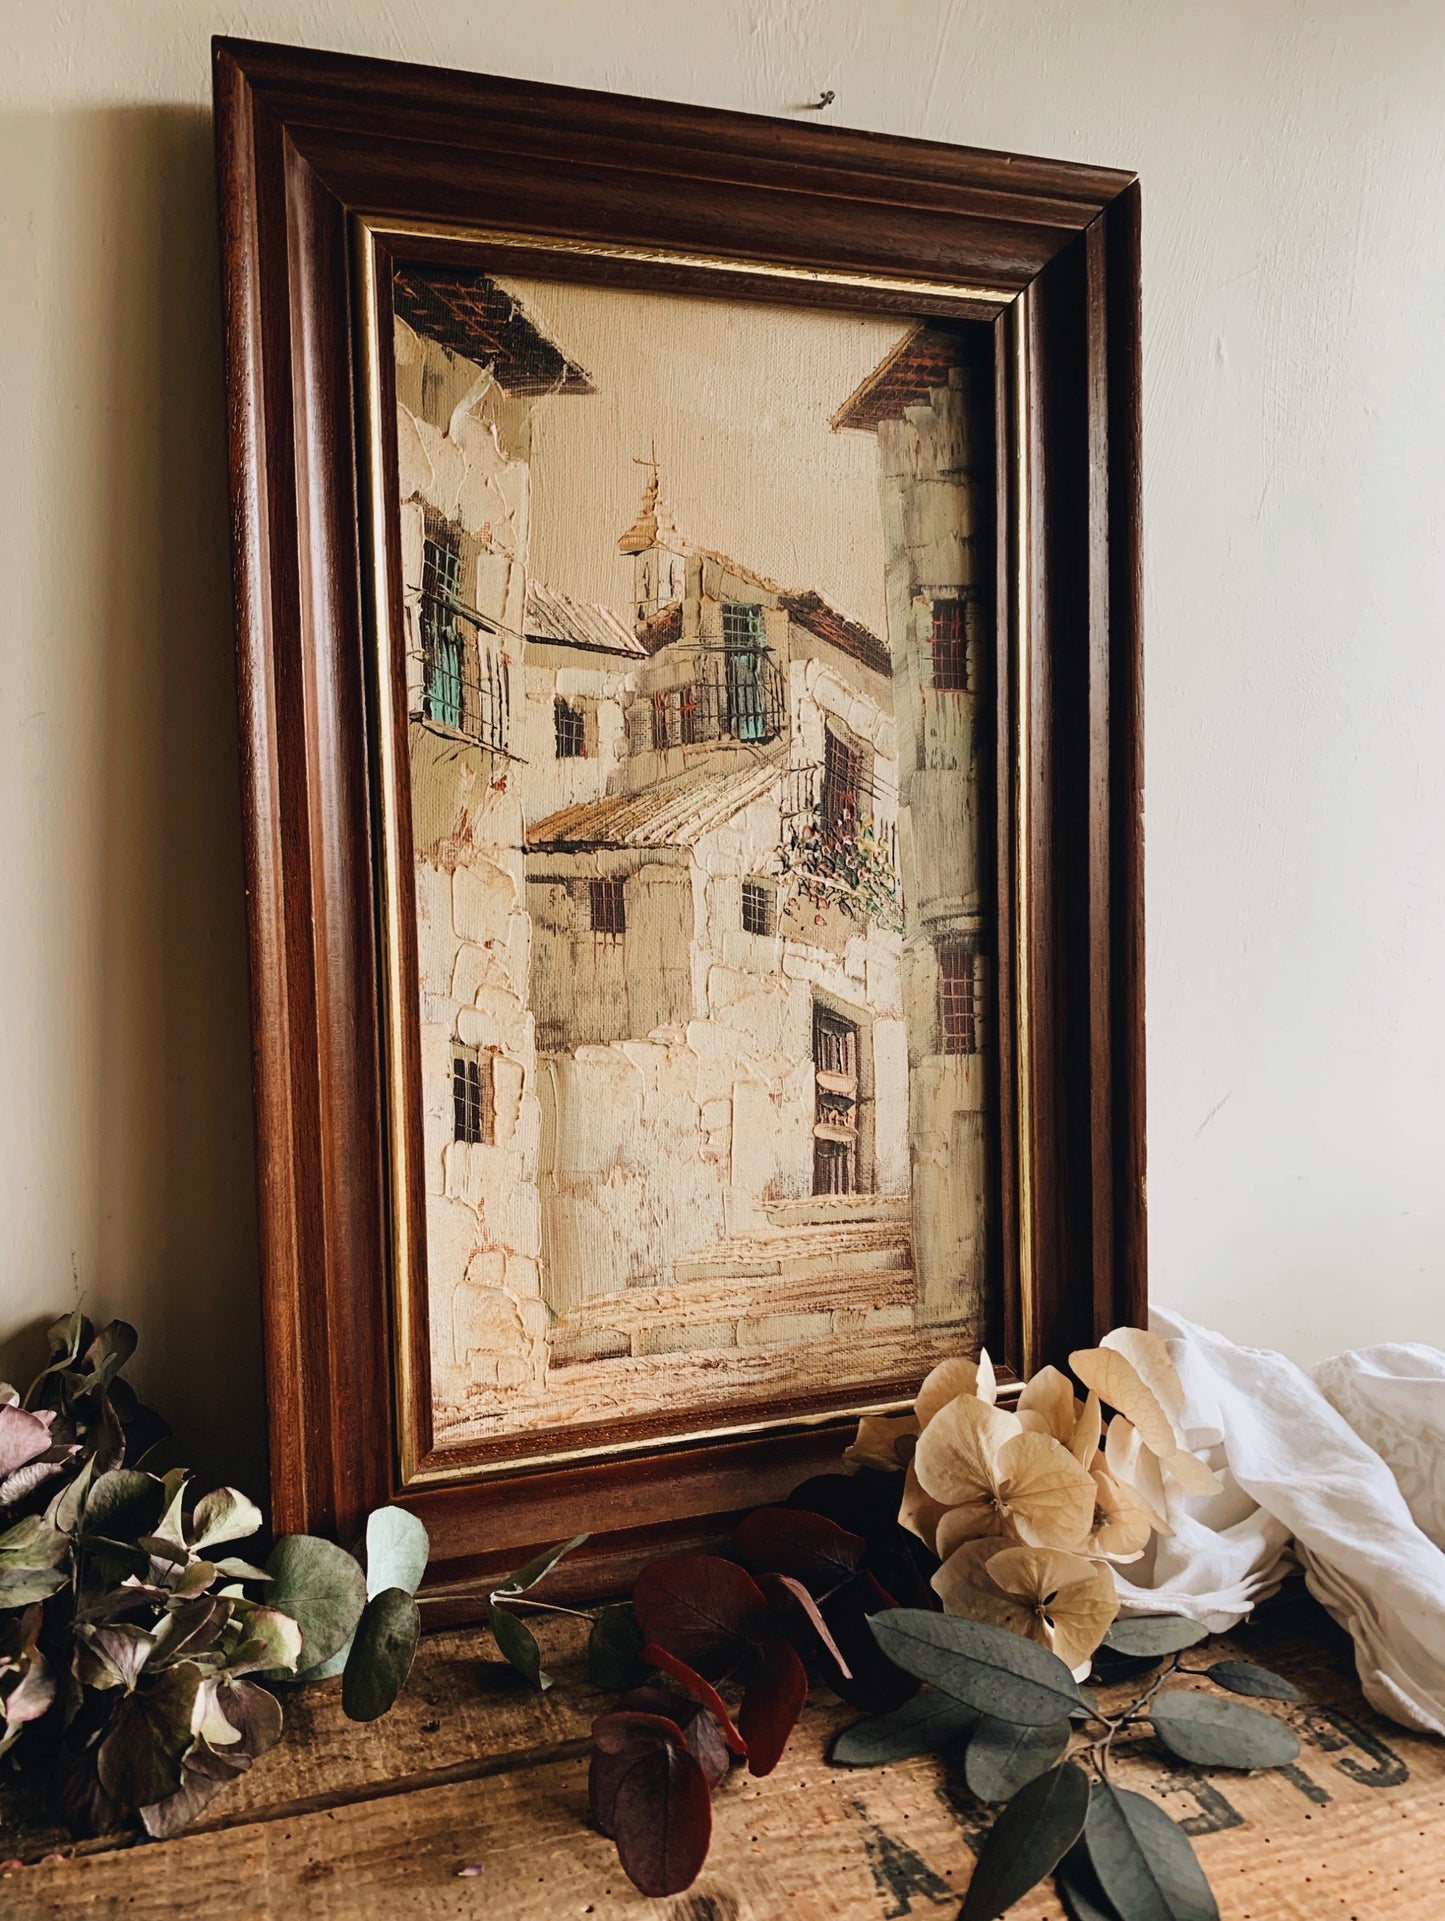 Rustic French (depicted town) Painting in Frame